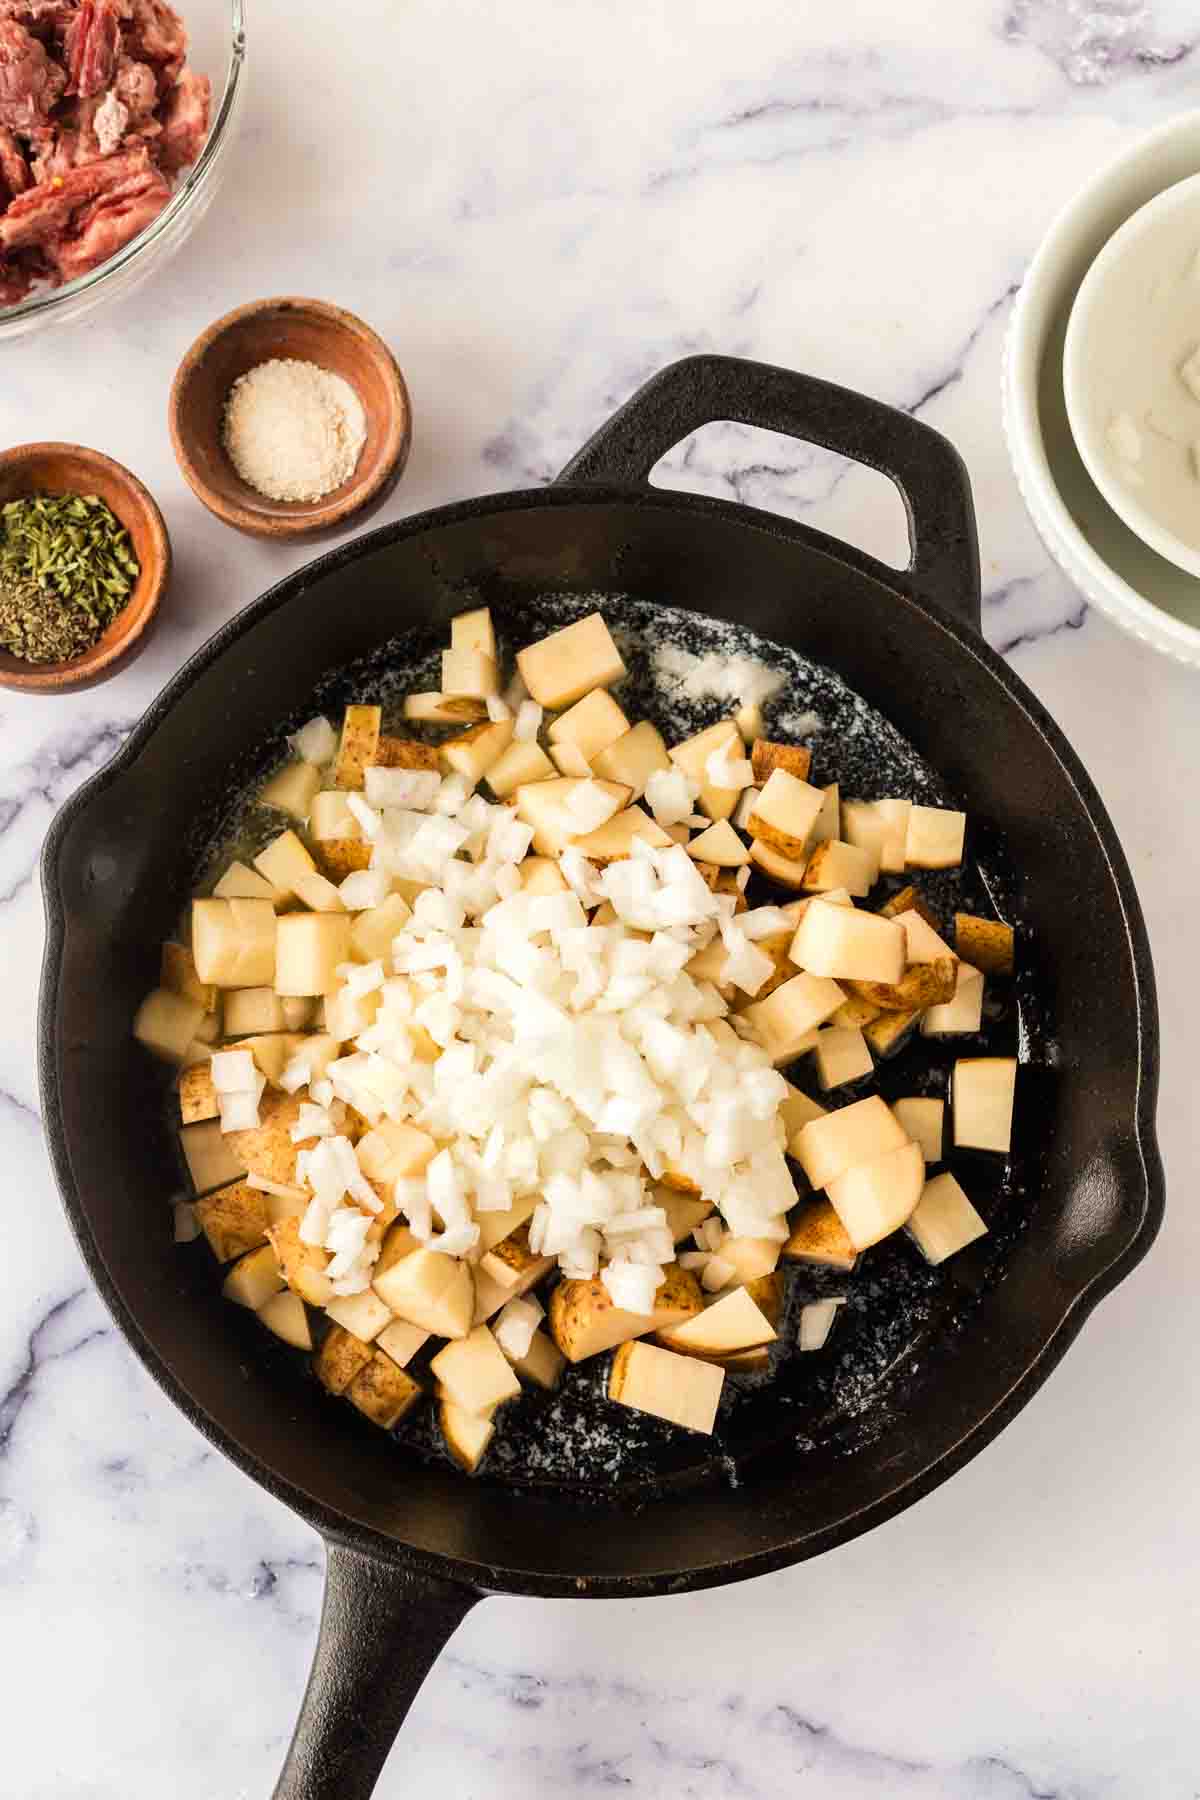 Diced potatoes and onions in a skillet.